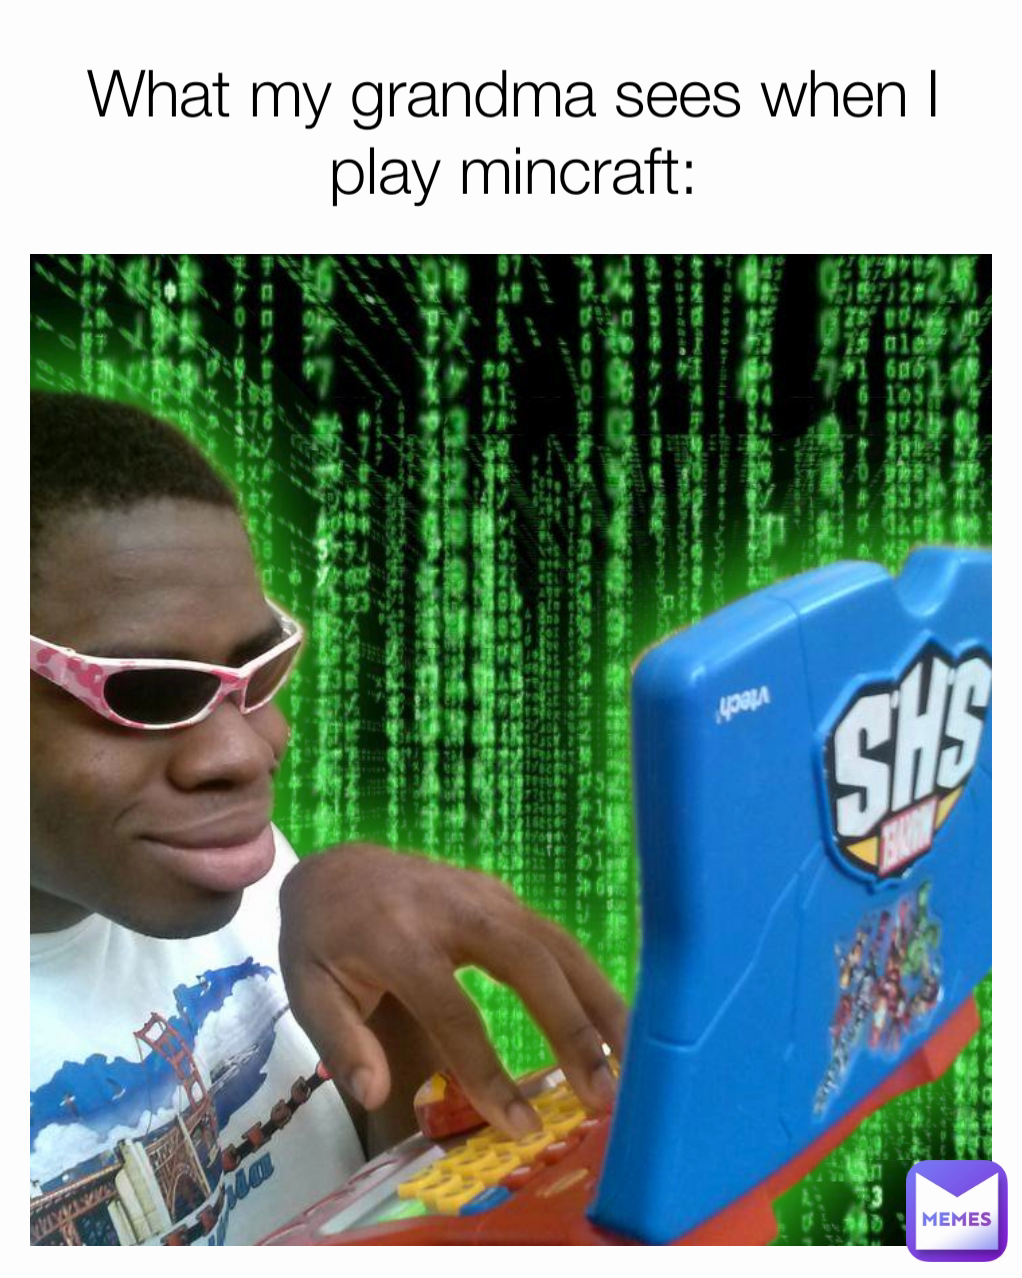 What my grandma sees when I play mincraft: